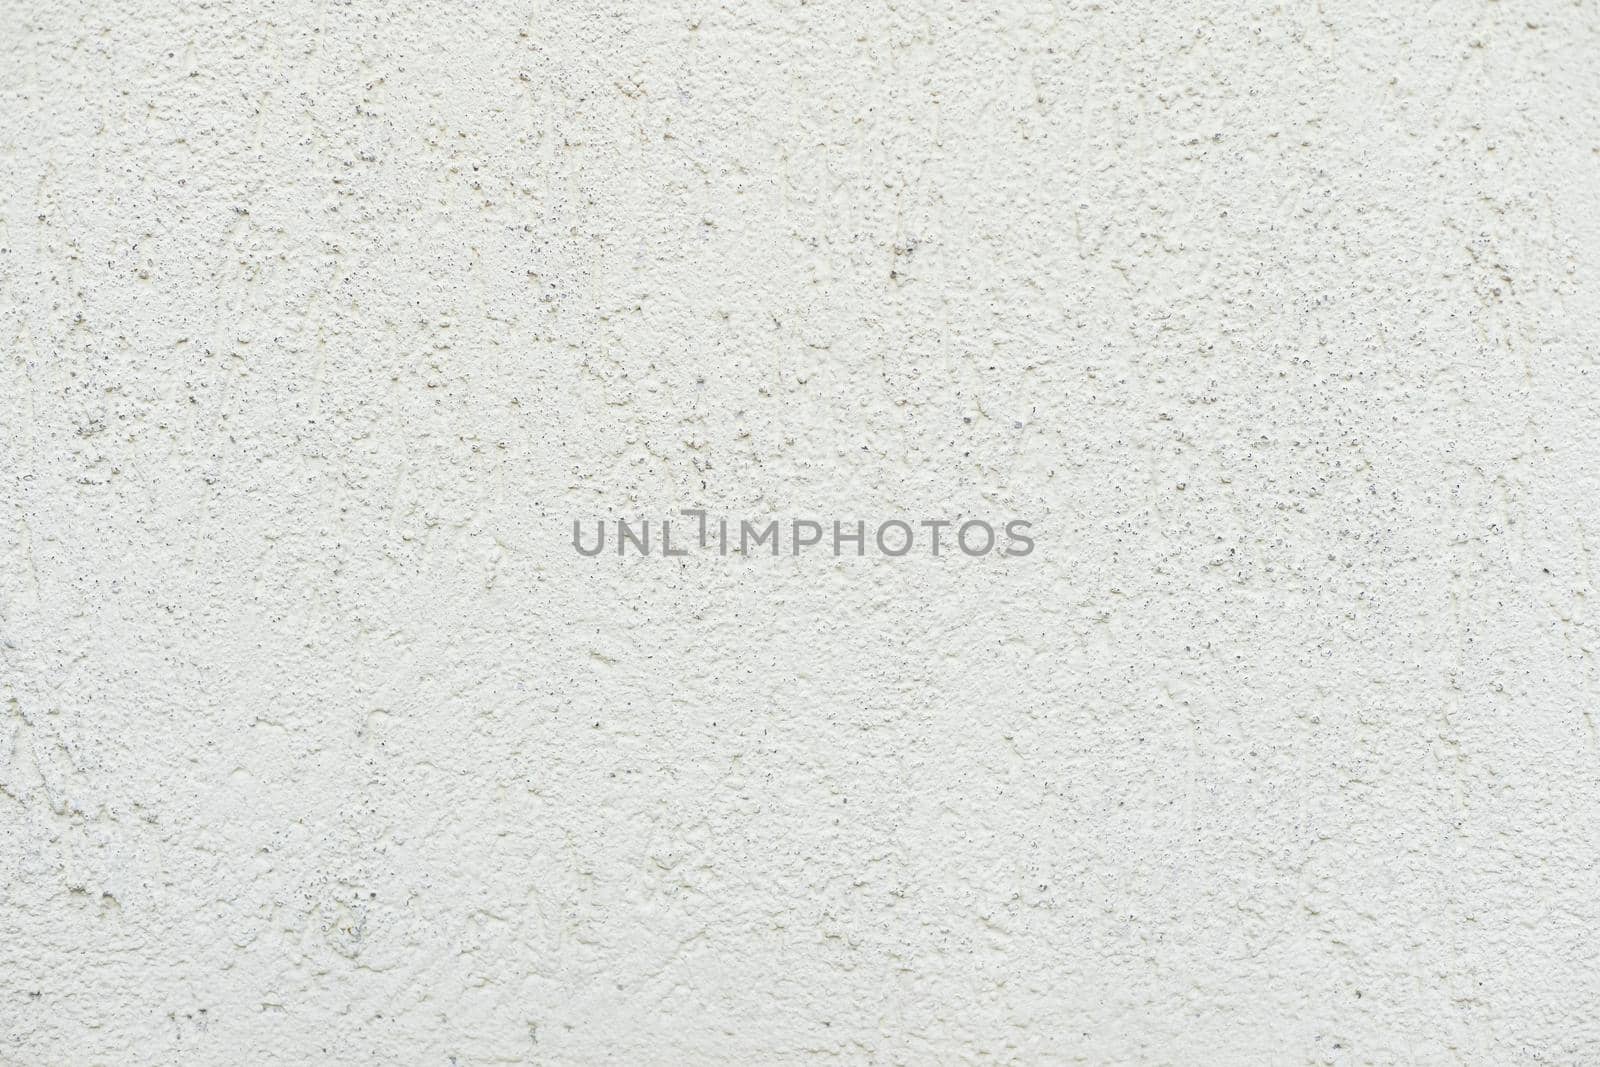 Pattern of light beige decorative and textured plaster. Construction and finishing materials for repairs of walls in apartments, houses and offices. Background and texture for design and decoration.